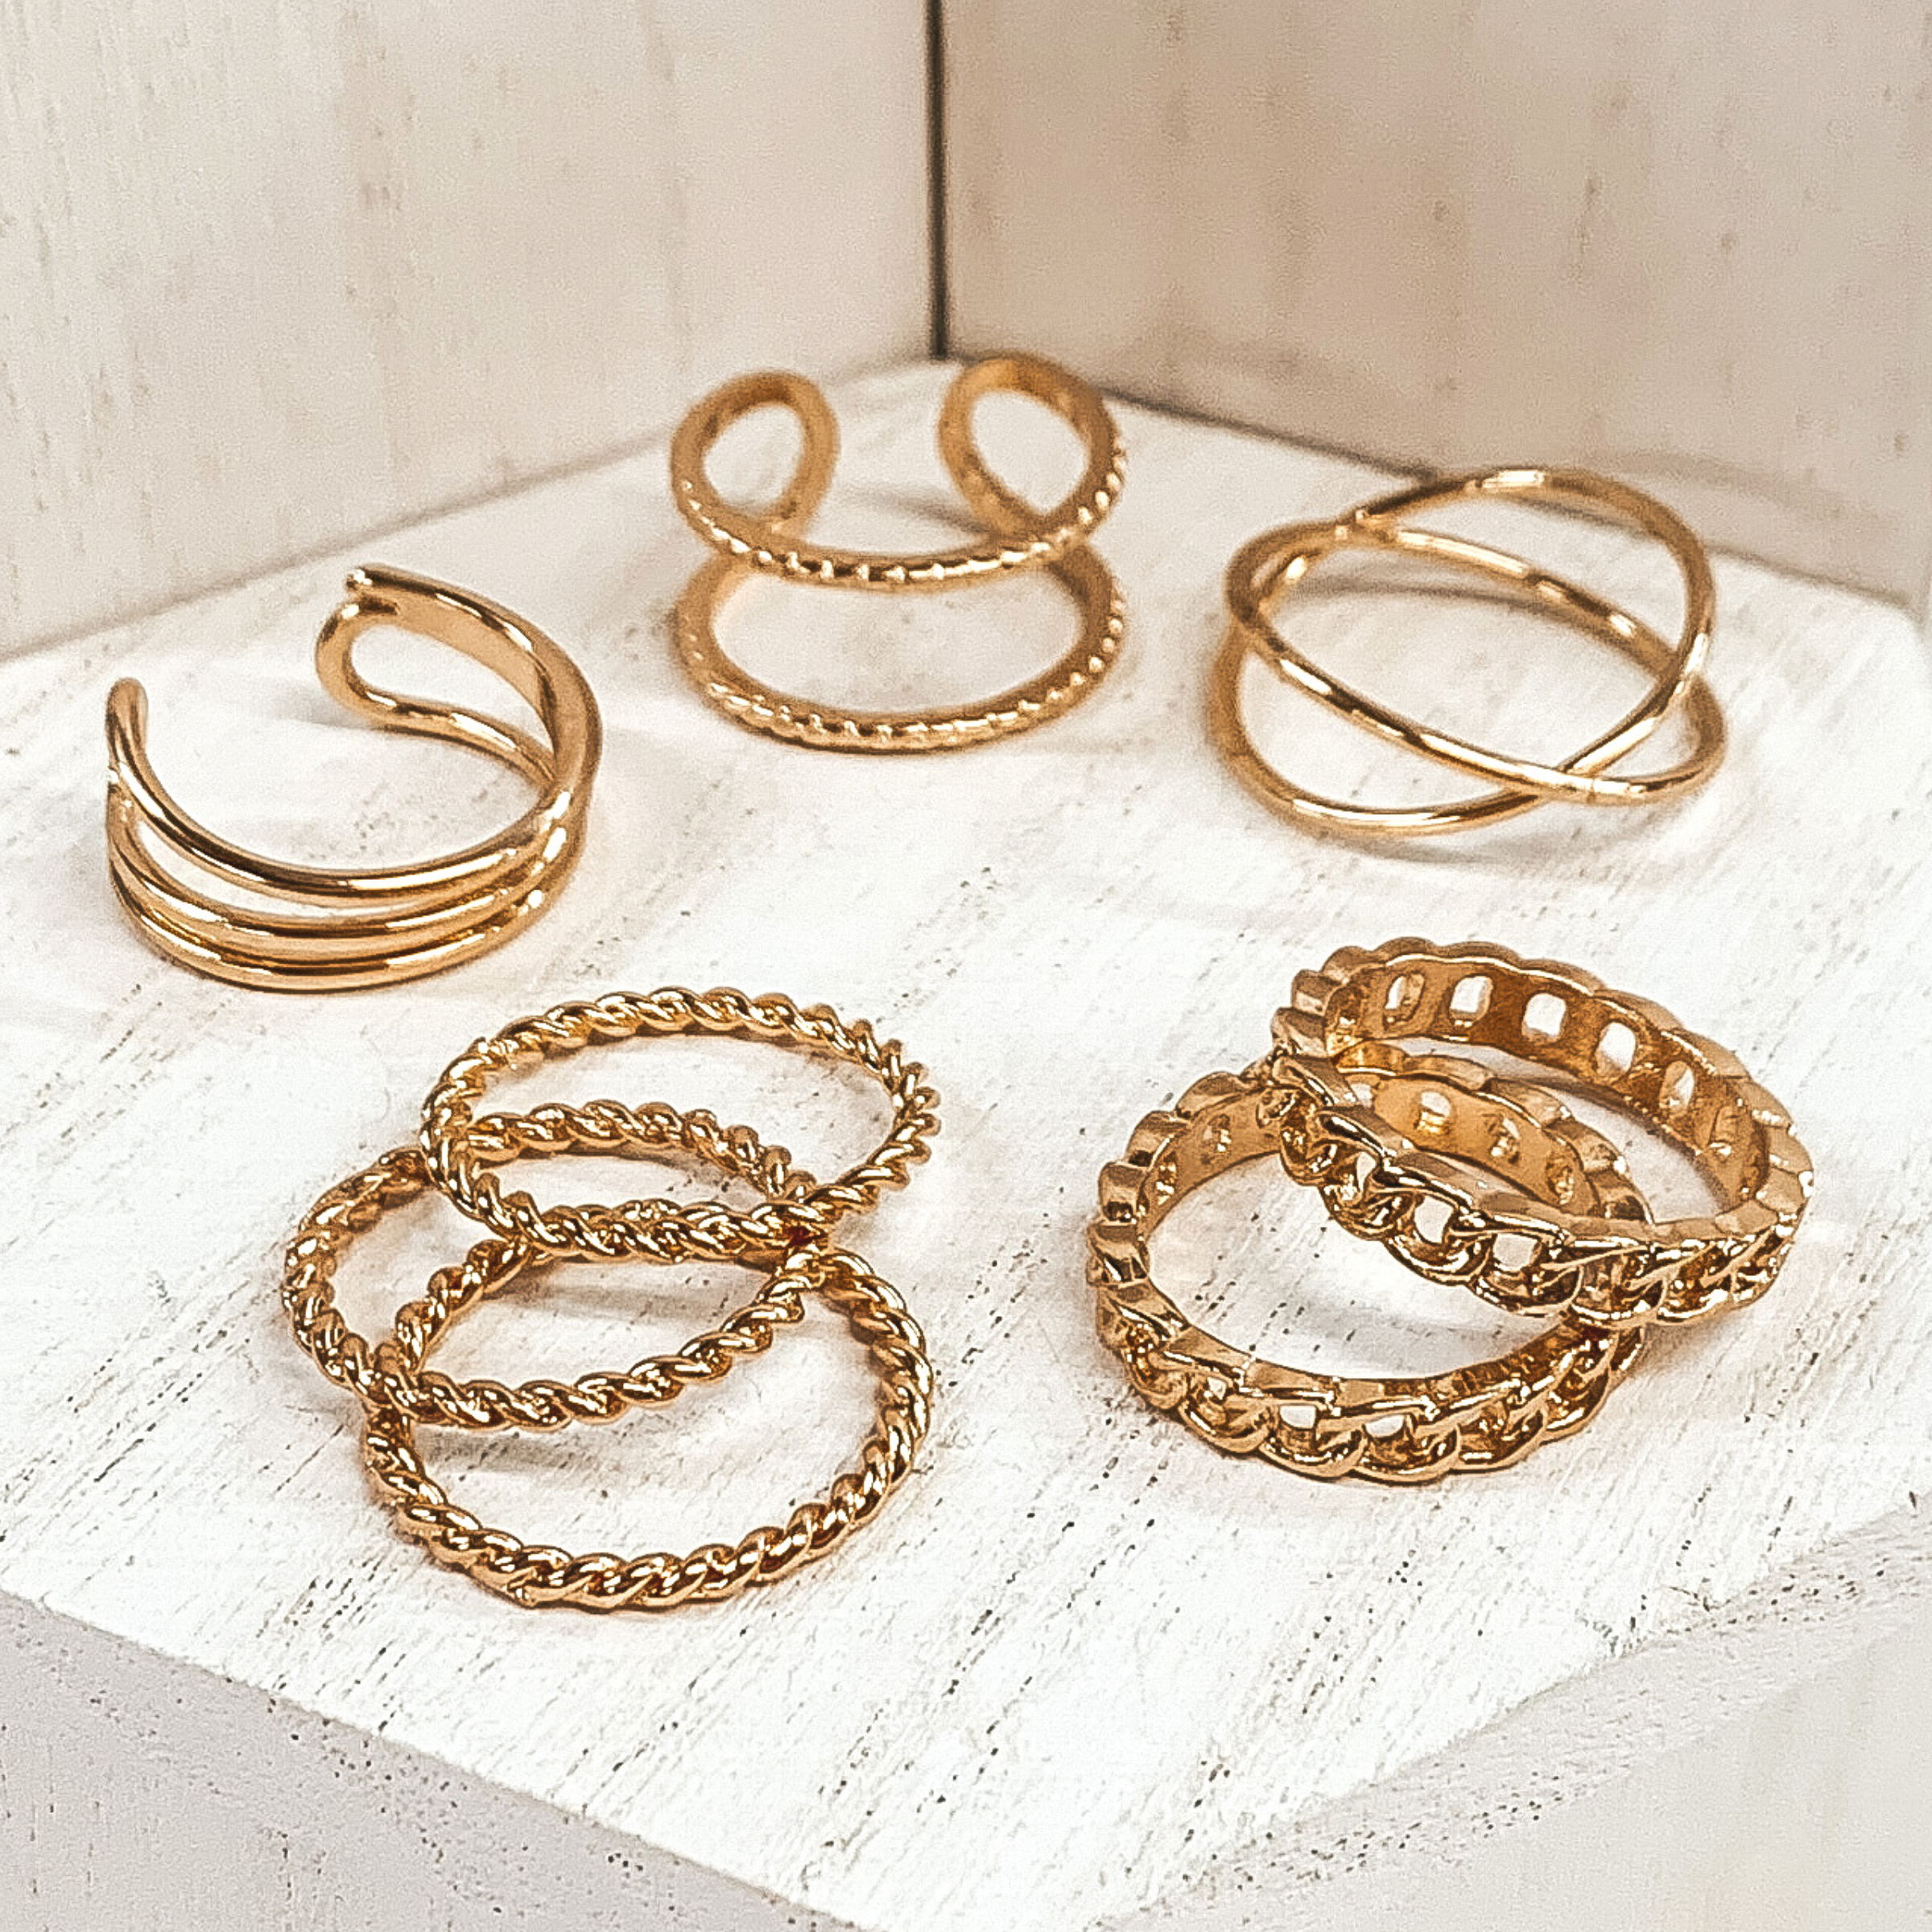 This is a eight piece gold ring set. Three rings are double in unique ways, there are three thin twisted rings, and the last two are chained rings. These rings are pictured on a white background.